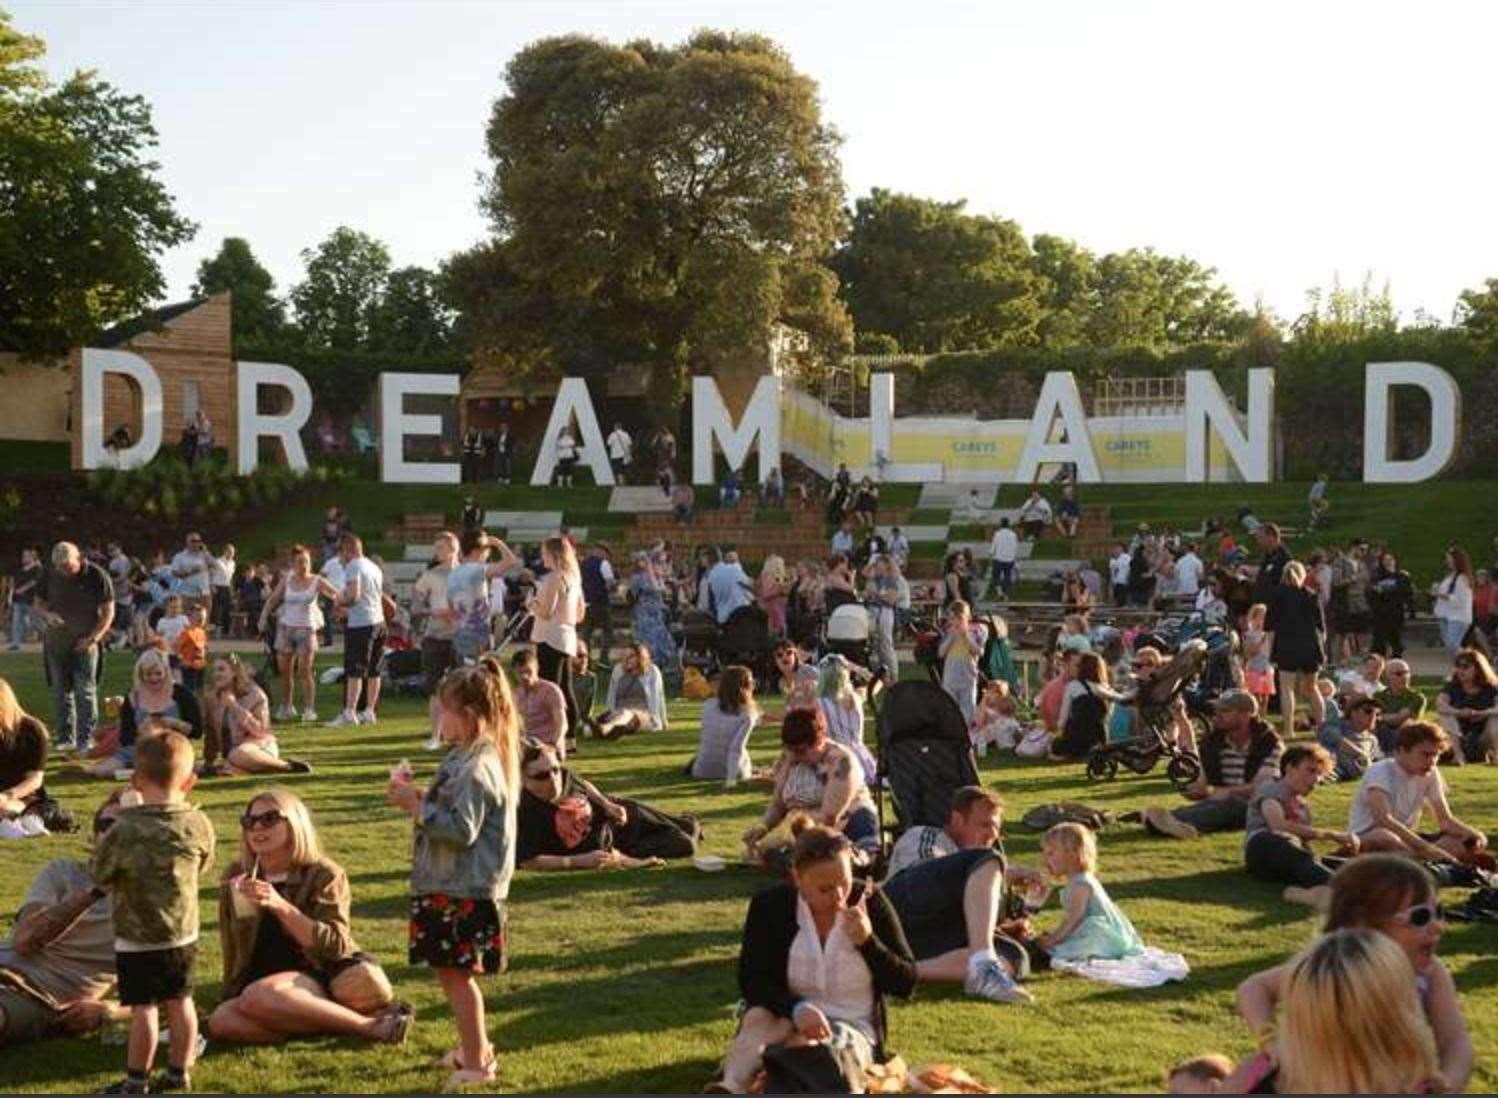 Summer events are helping to secure Dreamland's future.